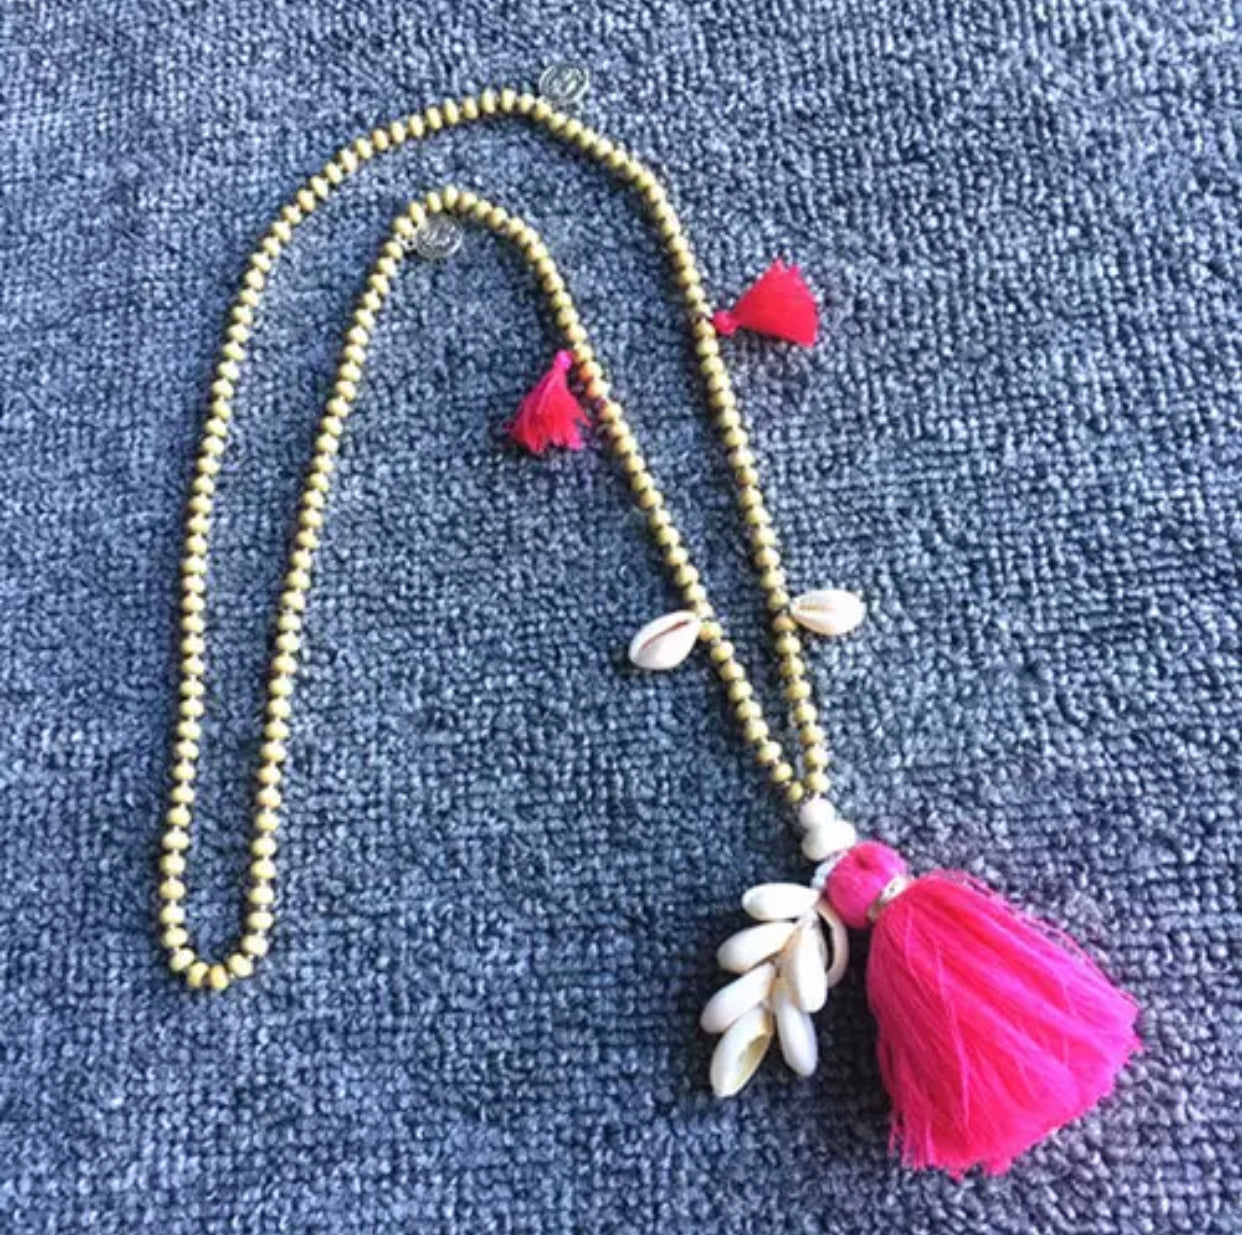 Wooden Beads Necklace with Cowry Shells and Hot Pink Cotton Tassels